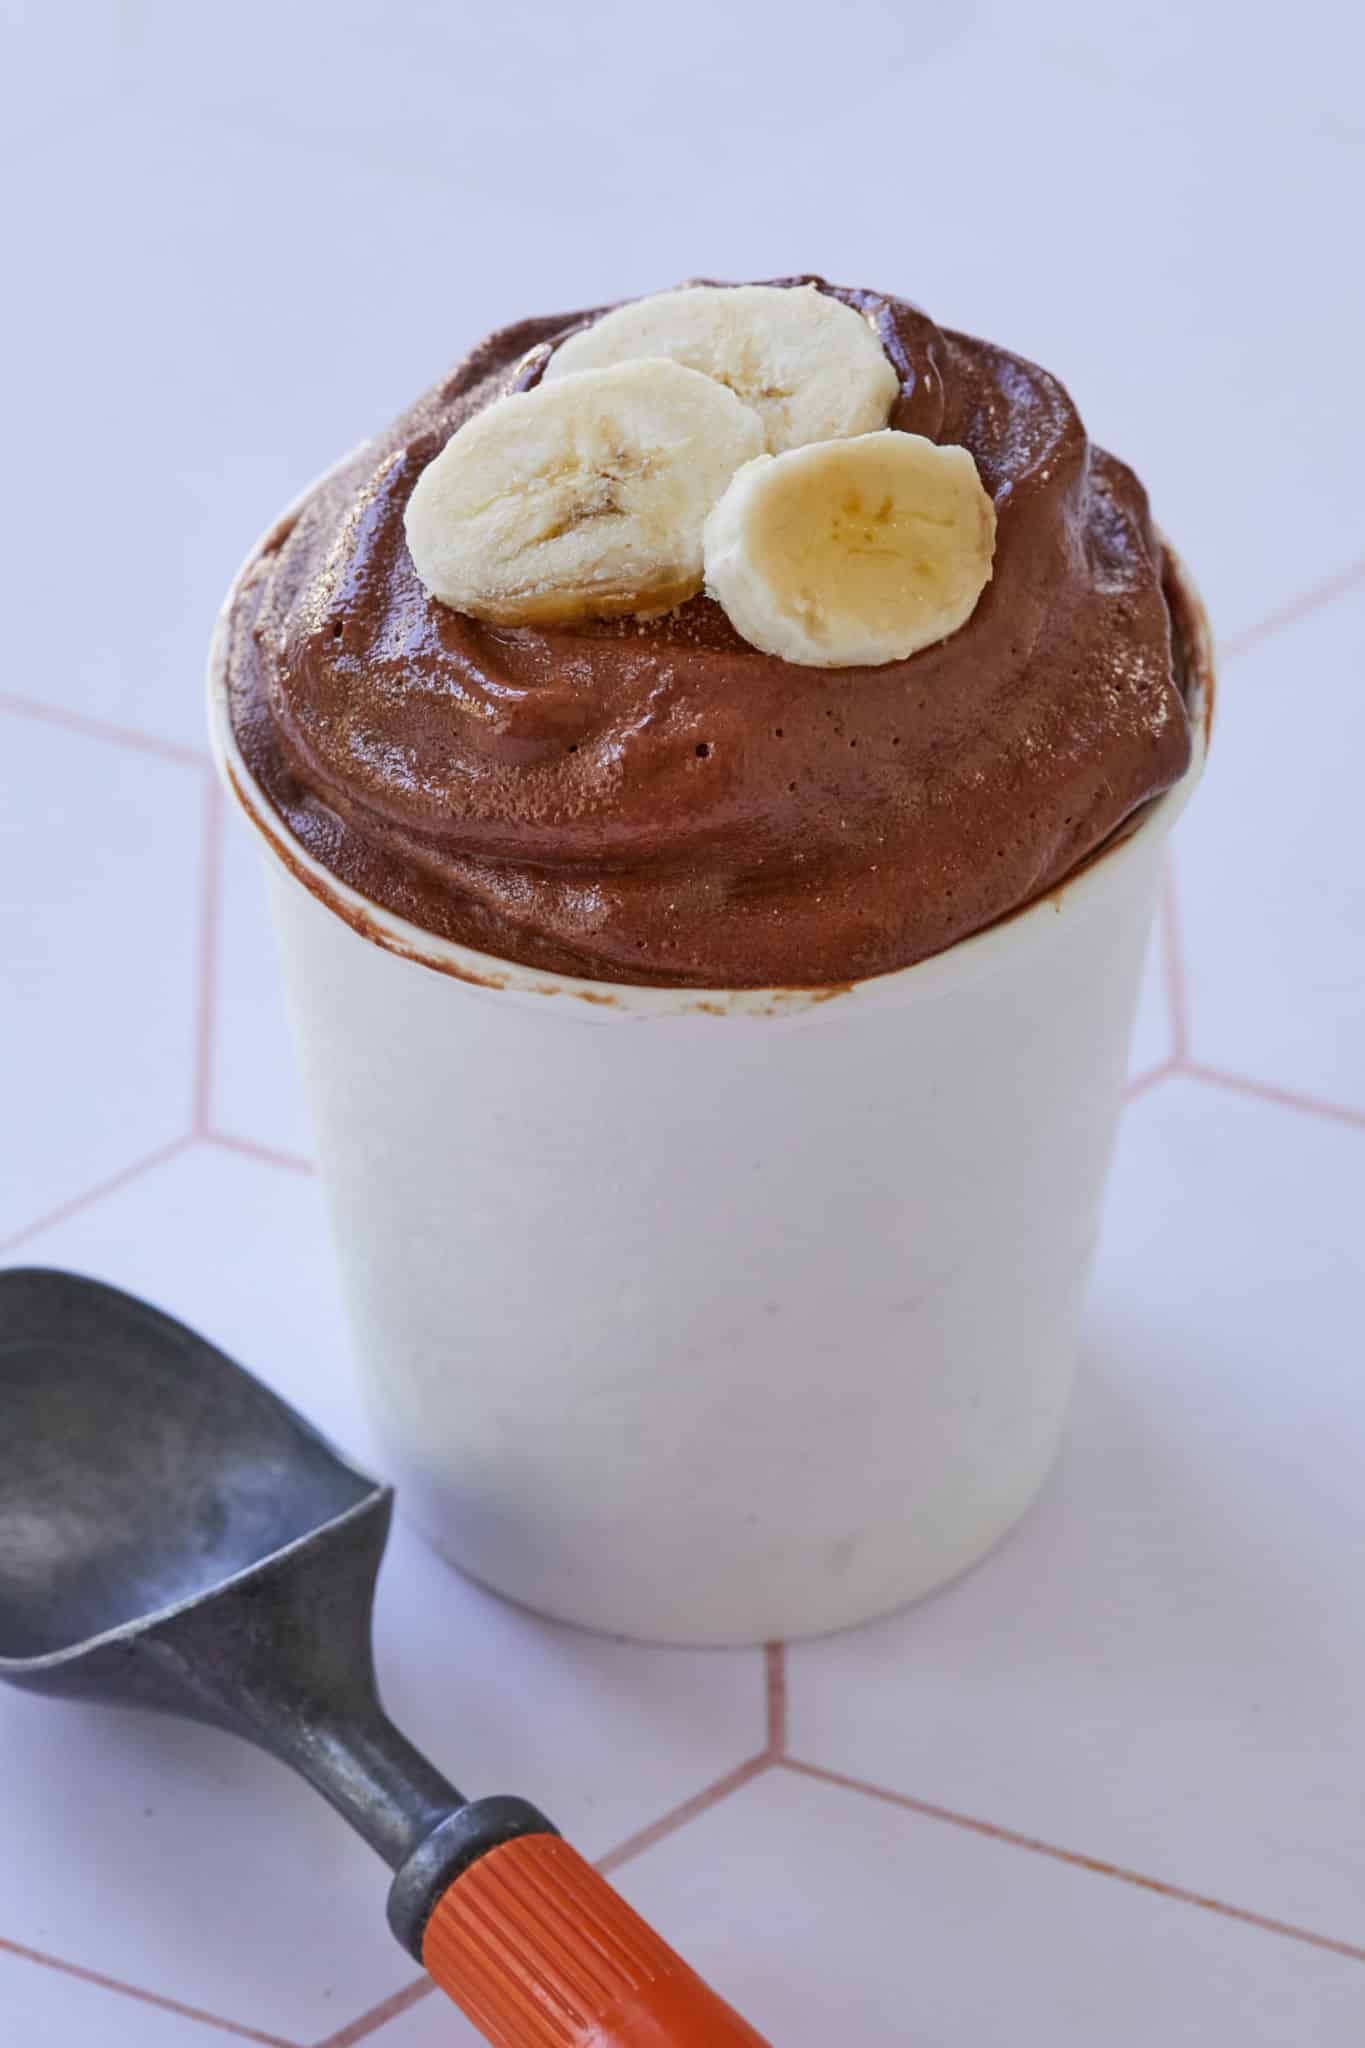 Smooth, cream chocolate ice cream for breakfast is served in a white cup with fresh bananas. This healthy ice cream recipe is made with frozen bananas and dates, perfect for a breakfast treat.